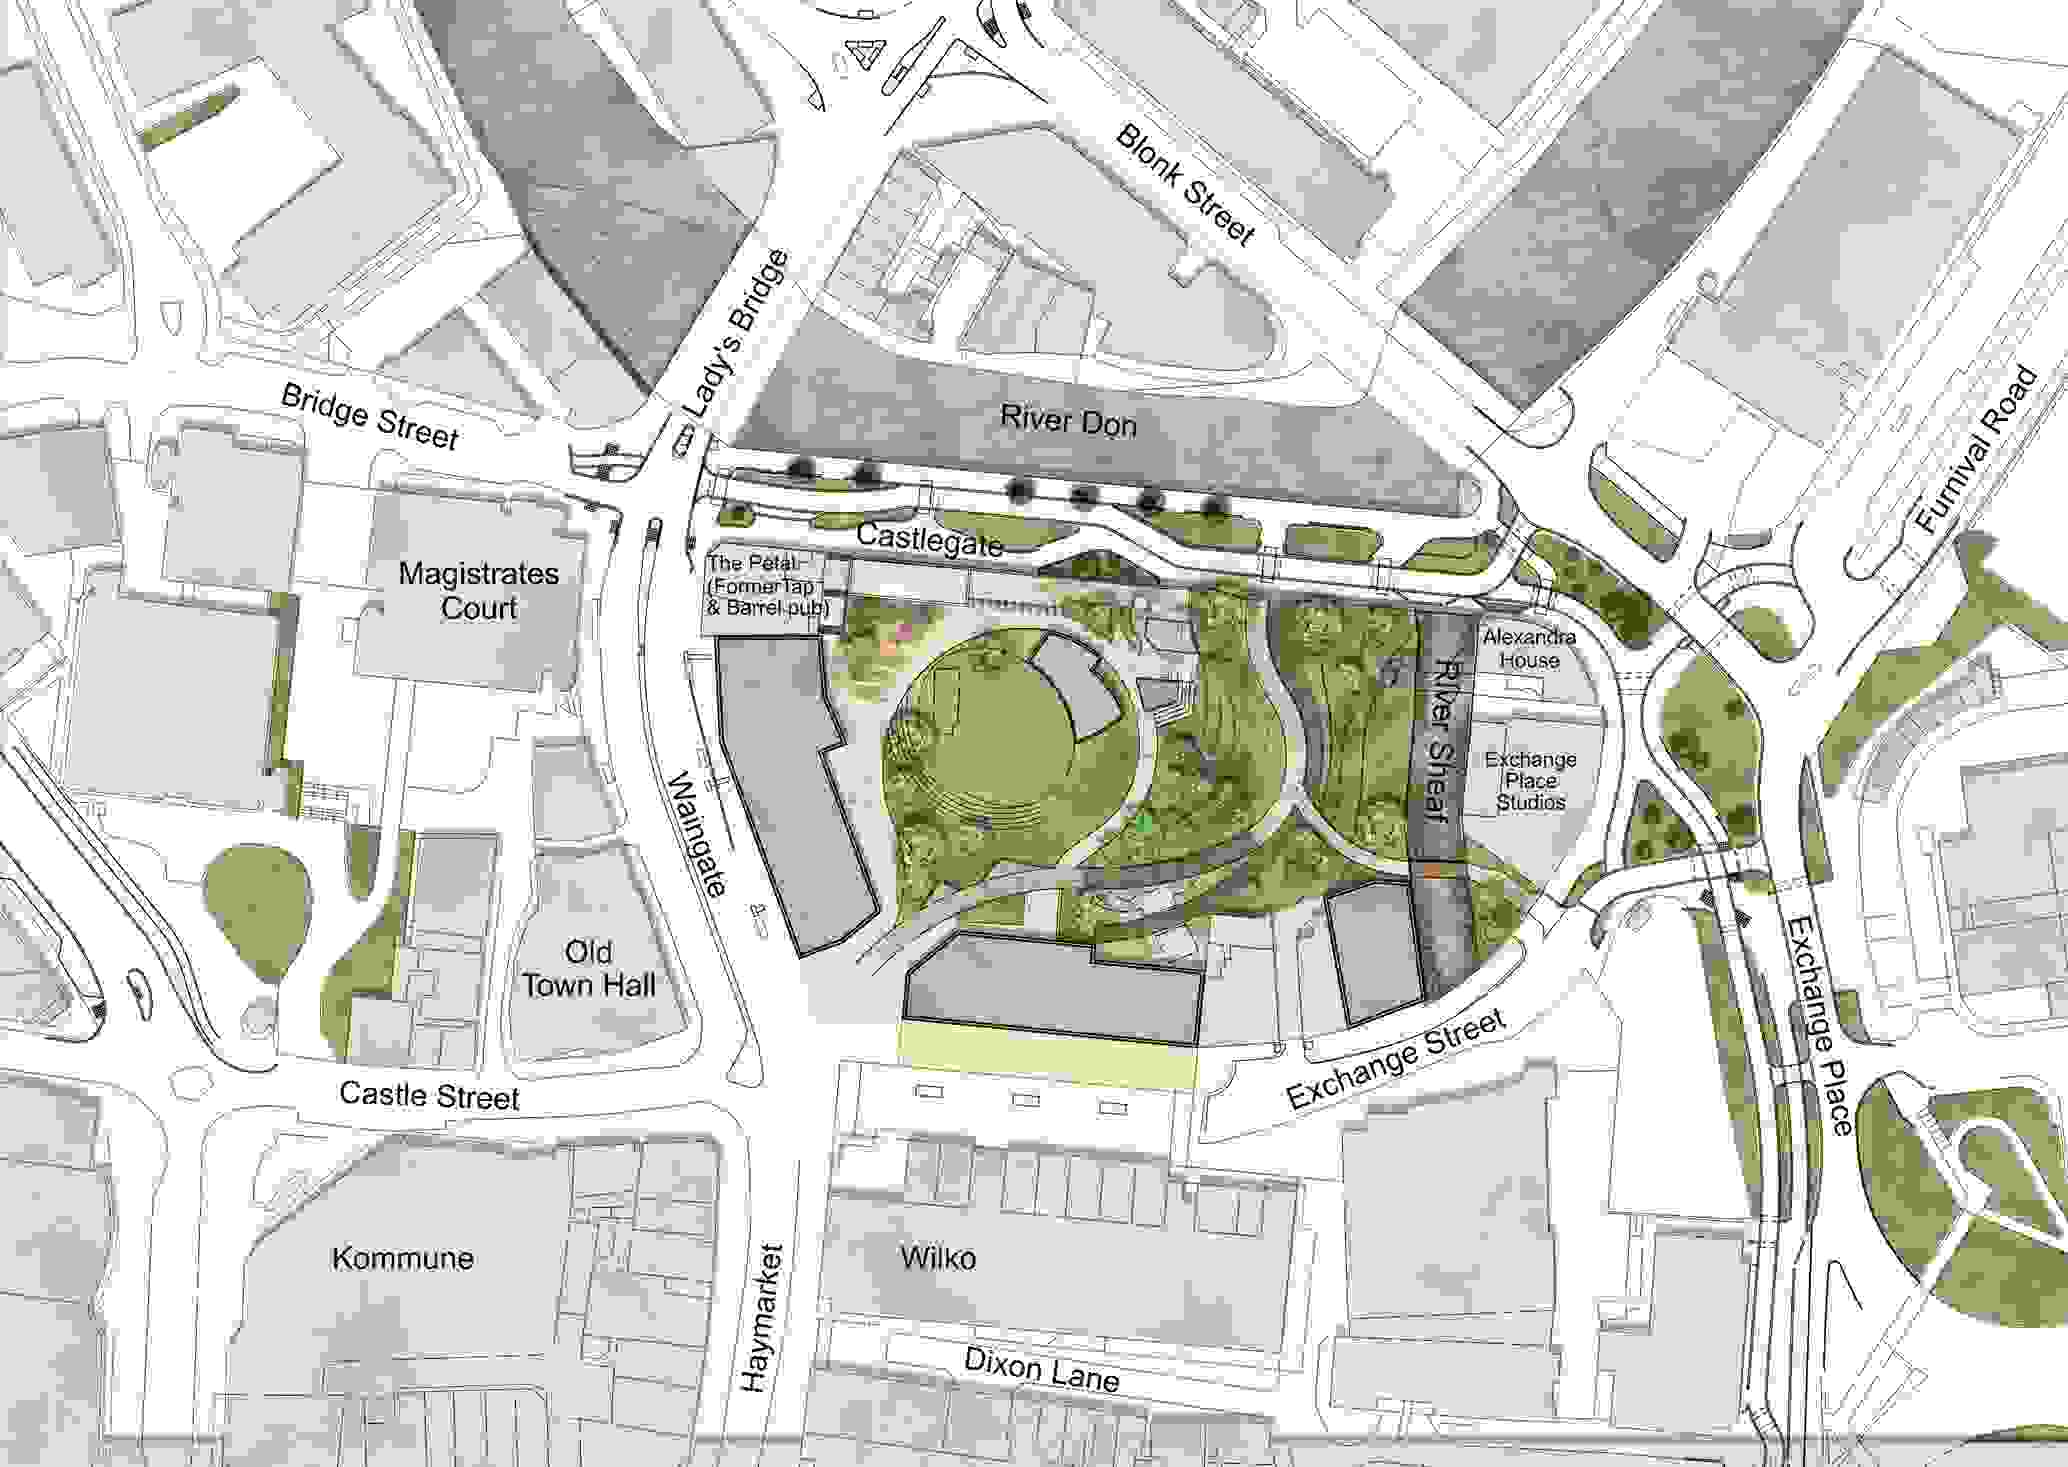 A concept plan design for the proposals in Castlegate